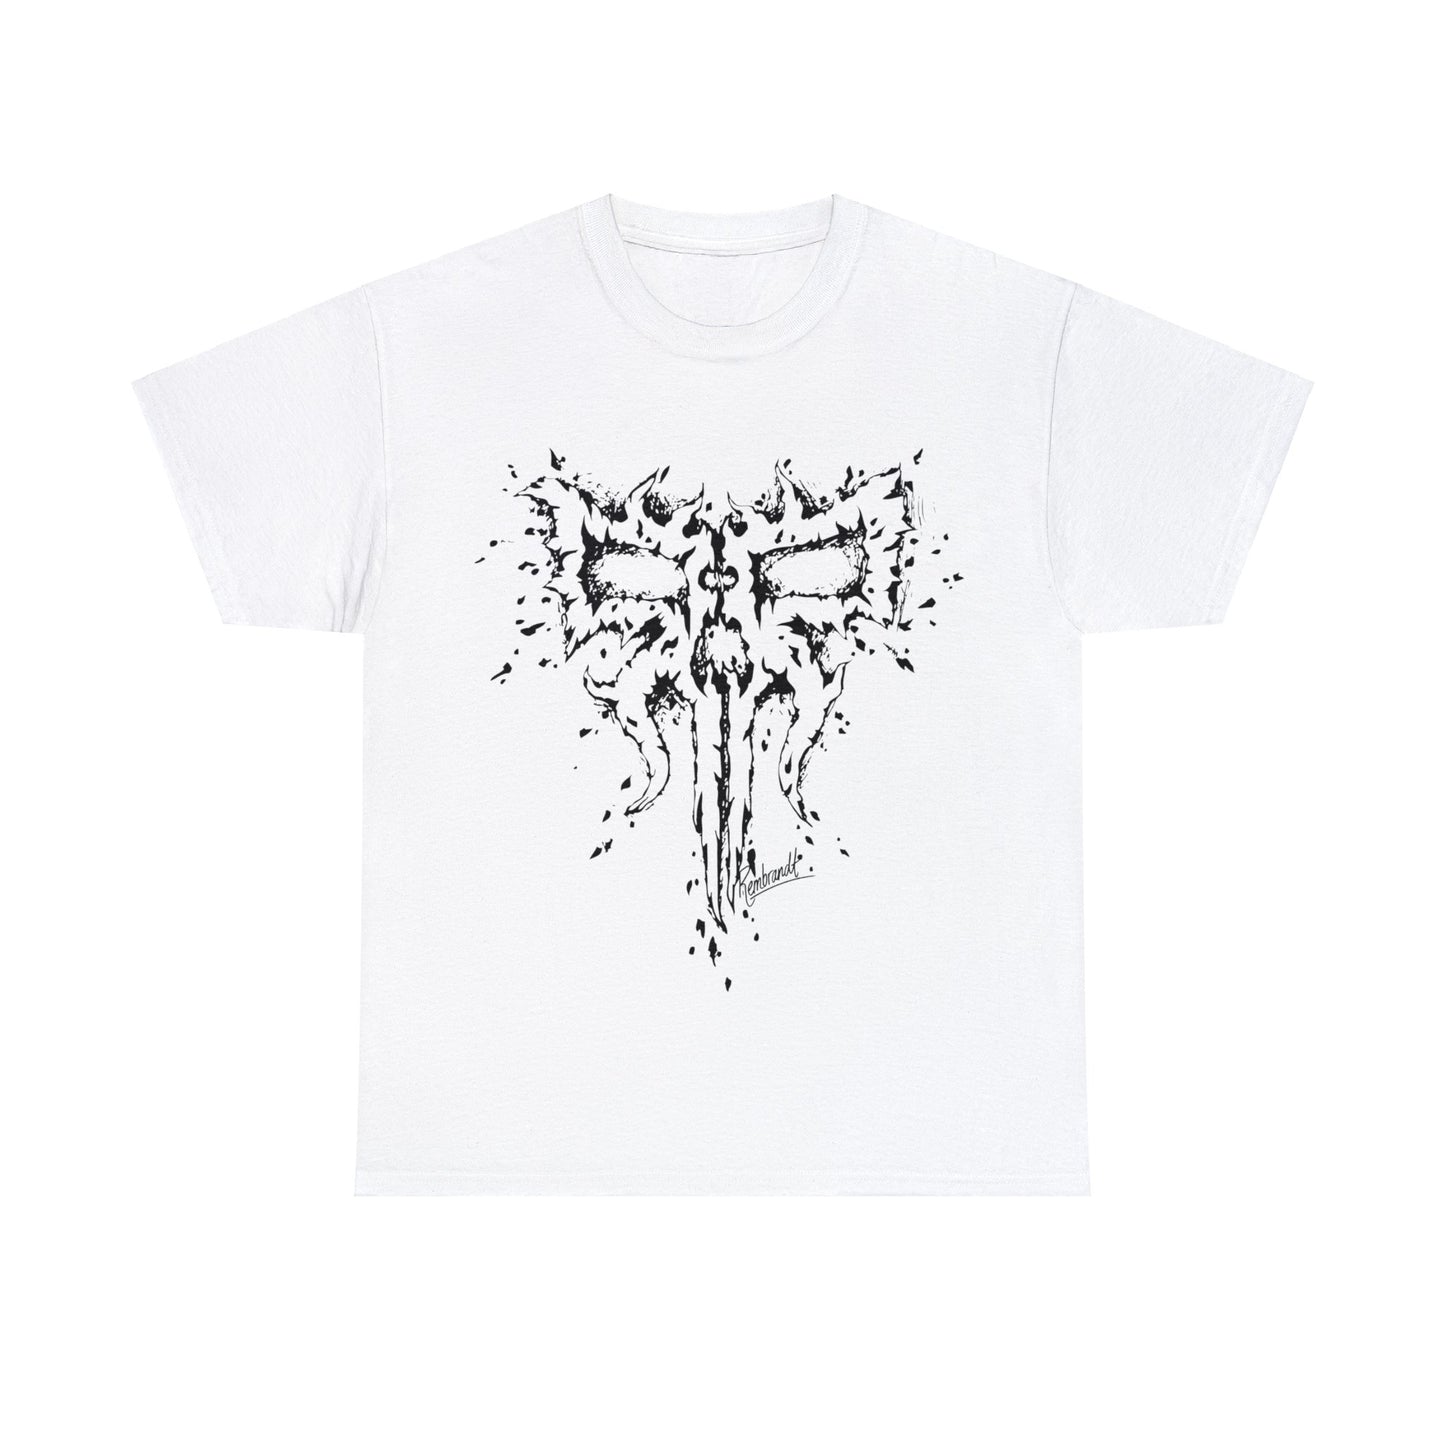 RICKY REMBRANDT 'DOUBLE R' LOGO PRINTED TEE